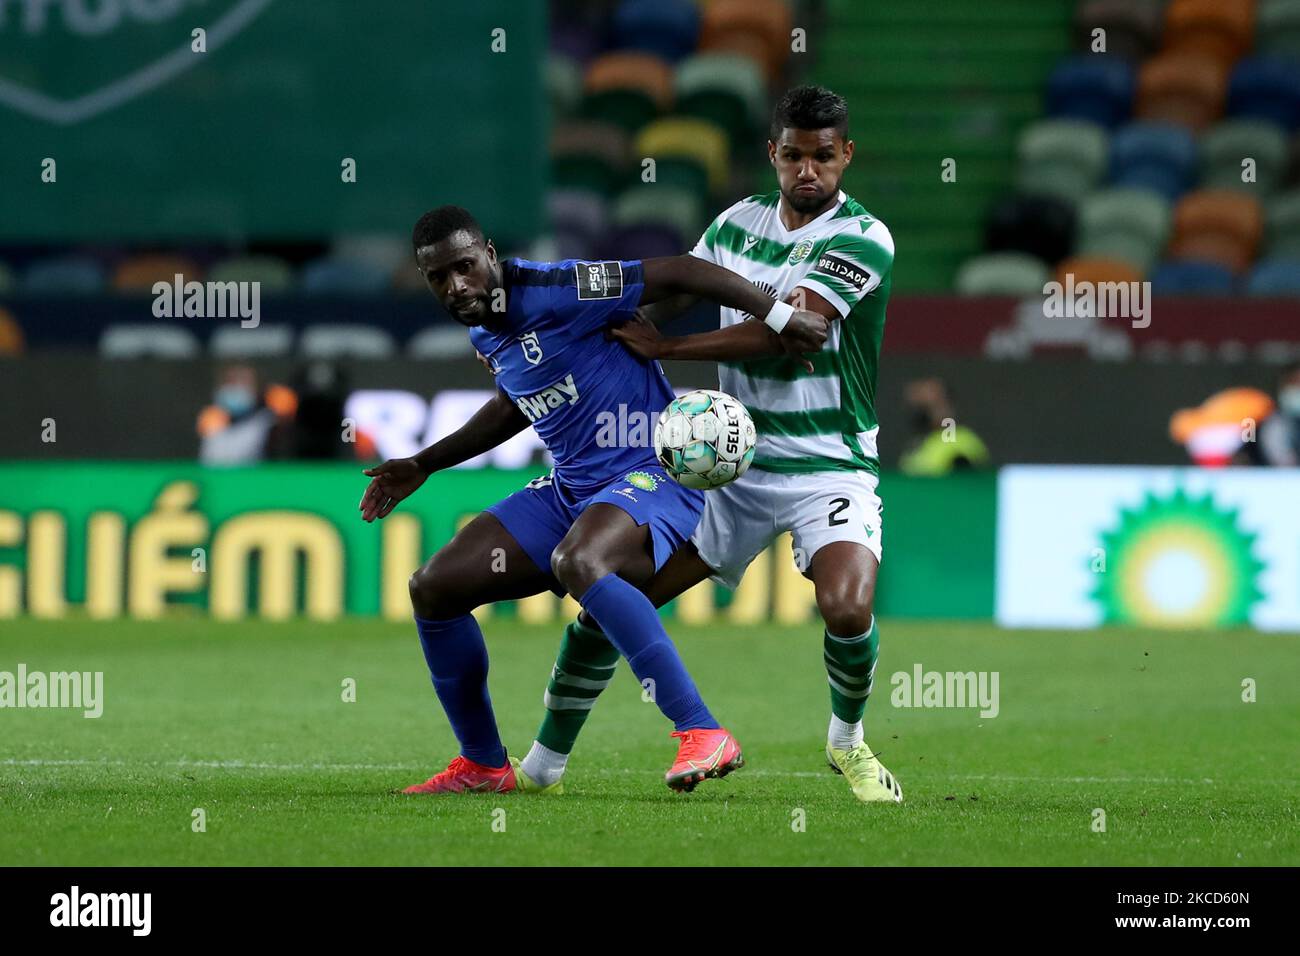 Matheus Reis of Sporting CP (R ) vies with Silvestre Varela of Belenenses SAD during the Portuguese League football match between Sporting CP and Belenenses SAD at Jose Alvalade stadium in Lisbon, Portugal on April 21, 2021. (Photo by Pedro FiÃºza/NurPhoto) Stock Photo